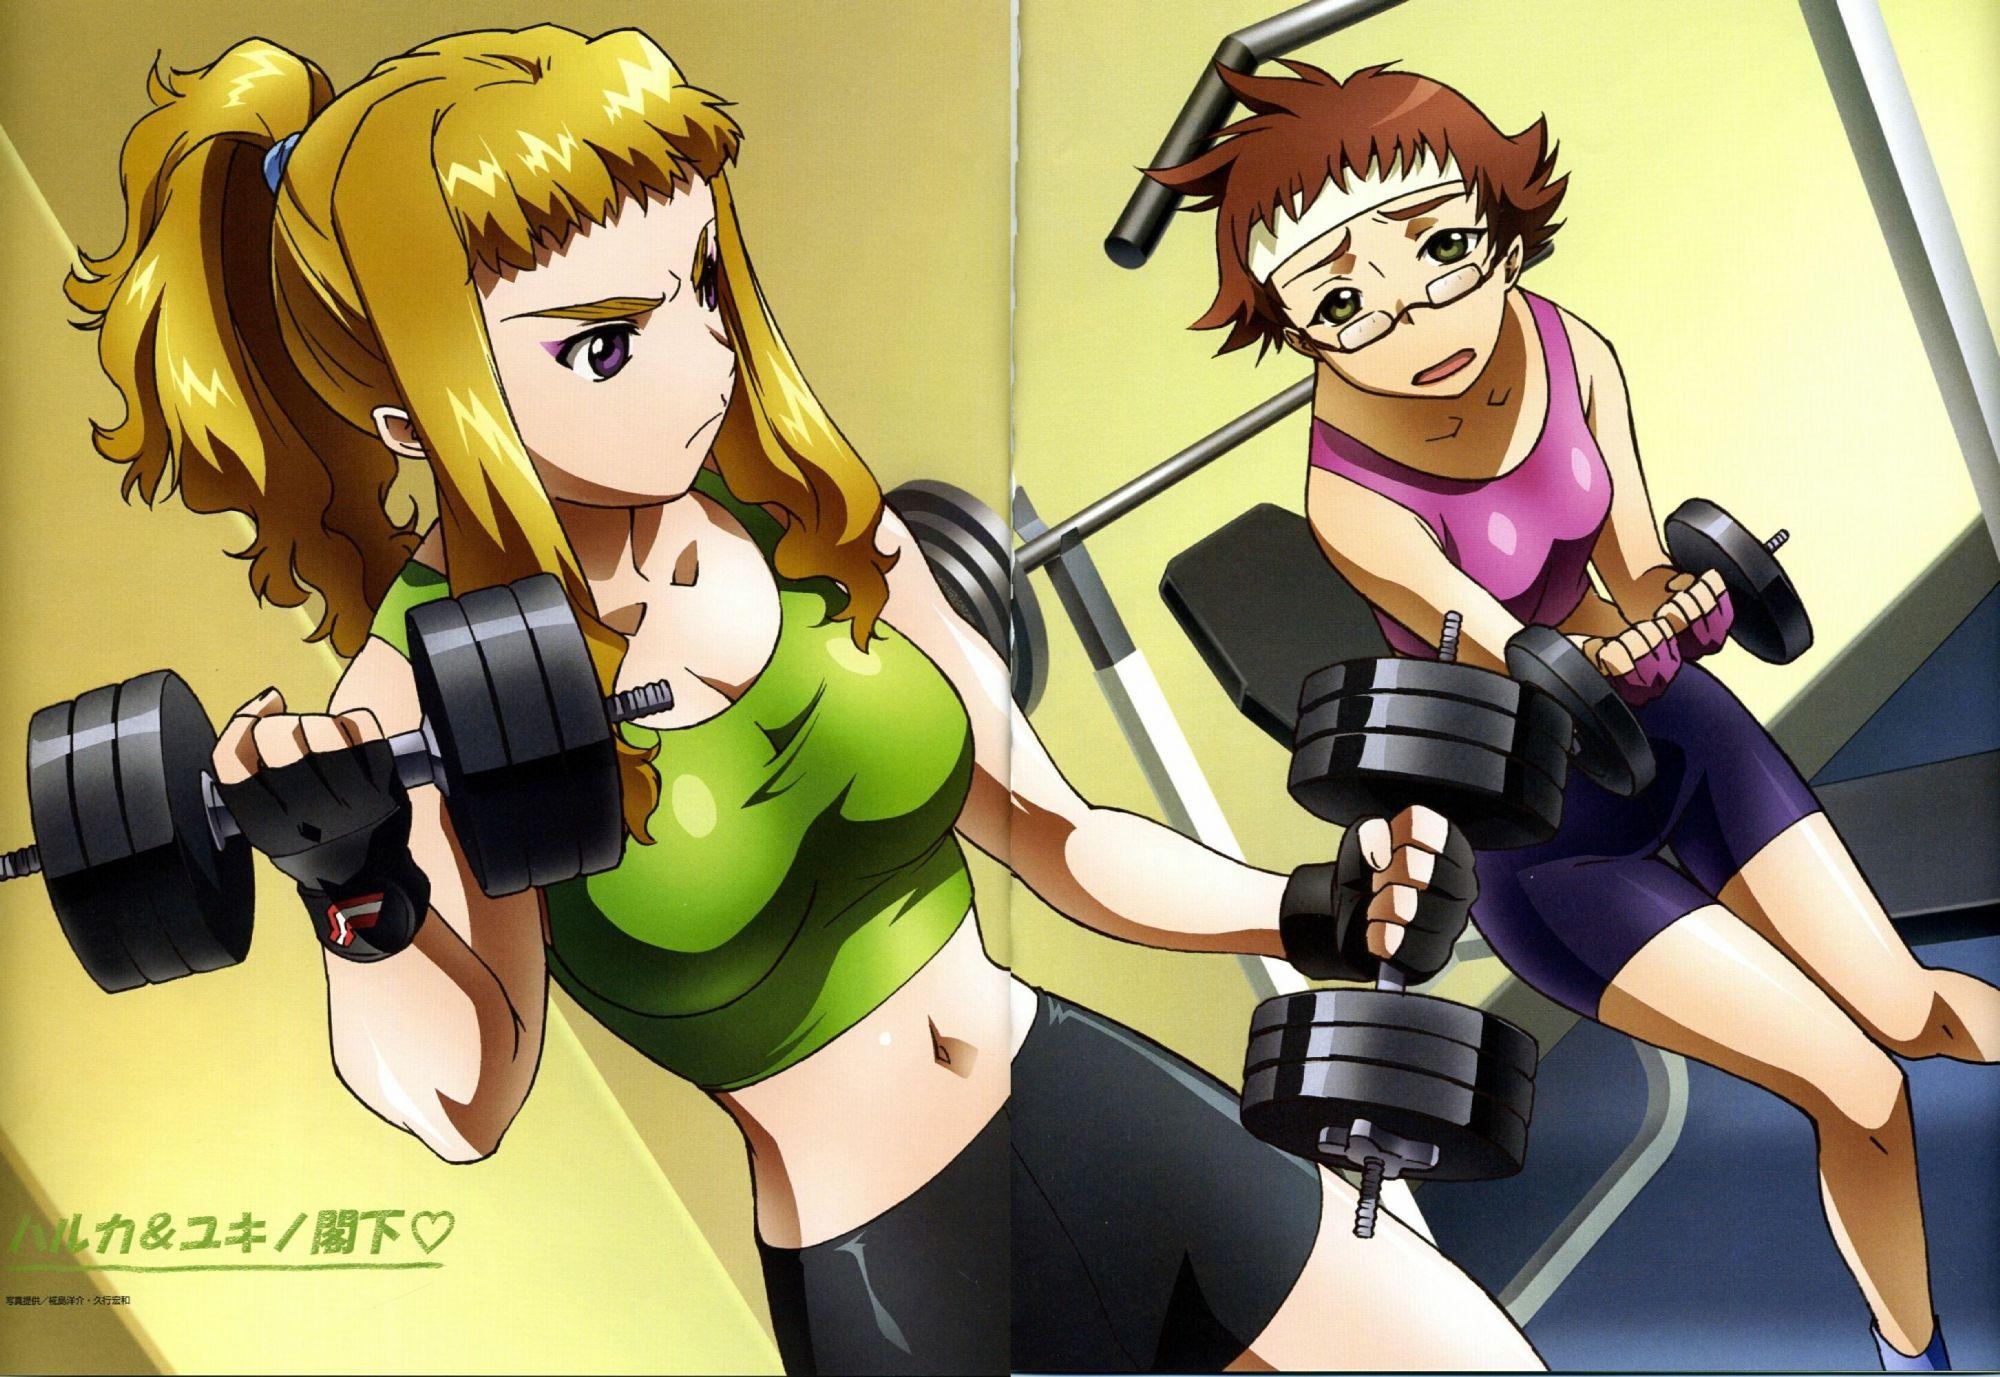 A woman is working out with dumbbells - Gym